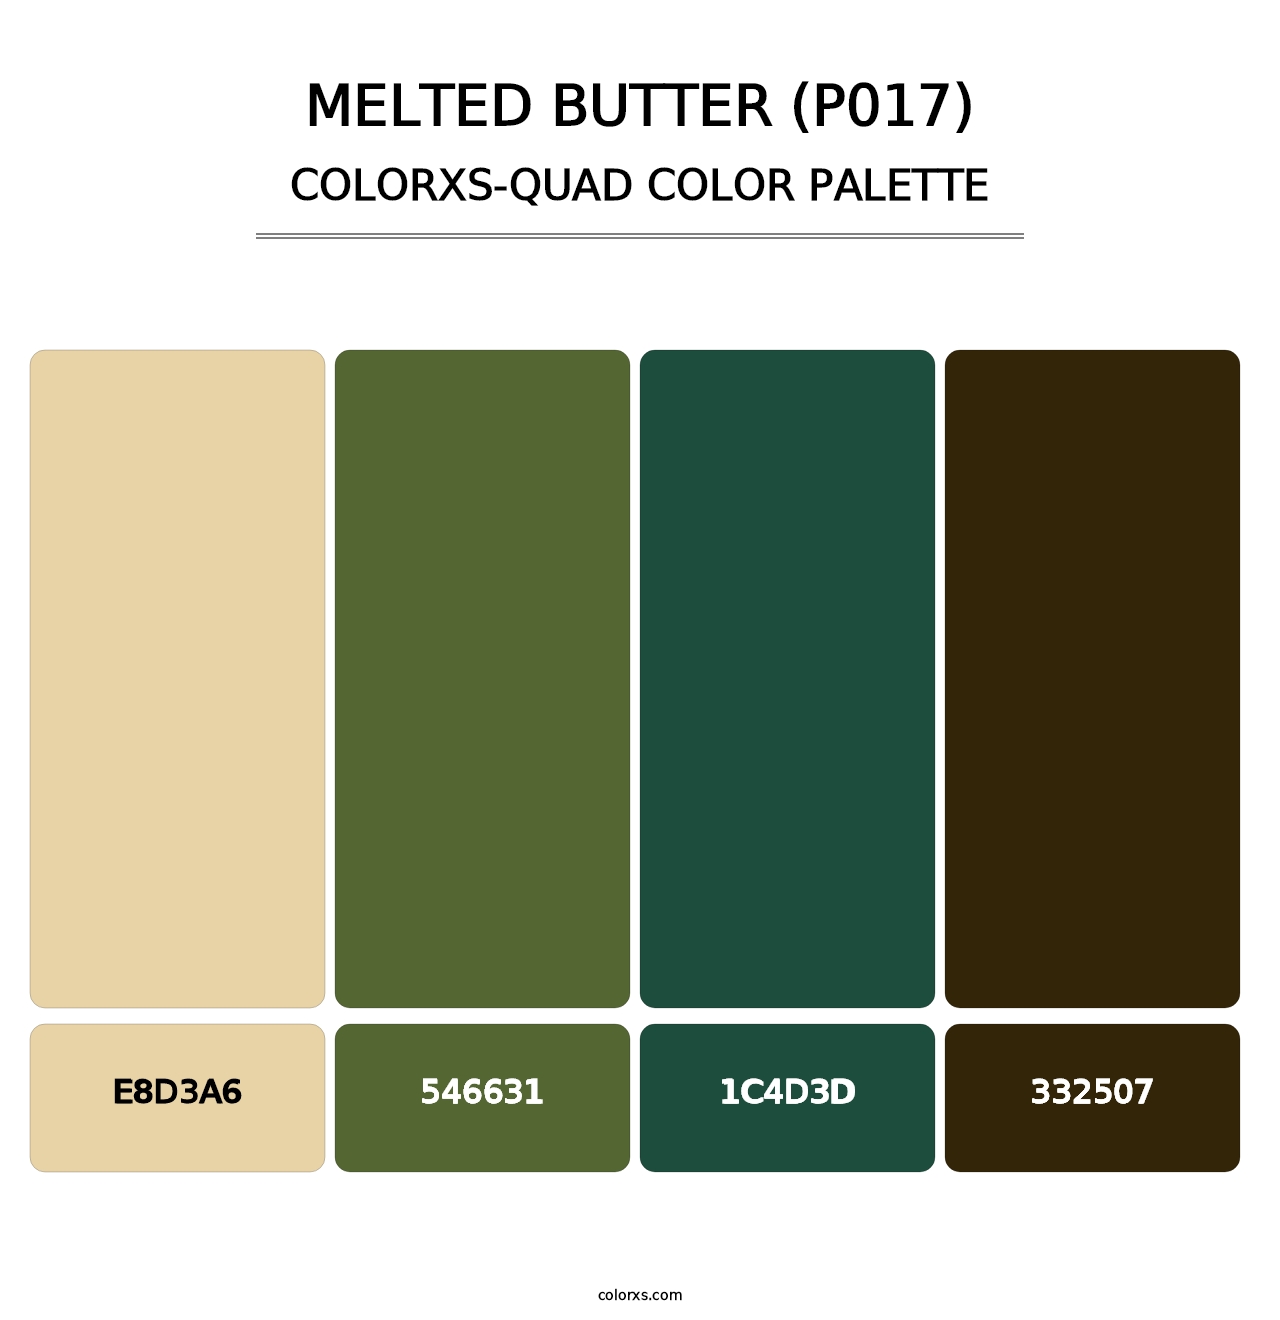 Melted Butter (P017) - Colorxs Quad Palette